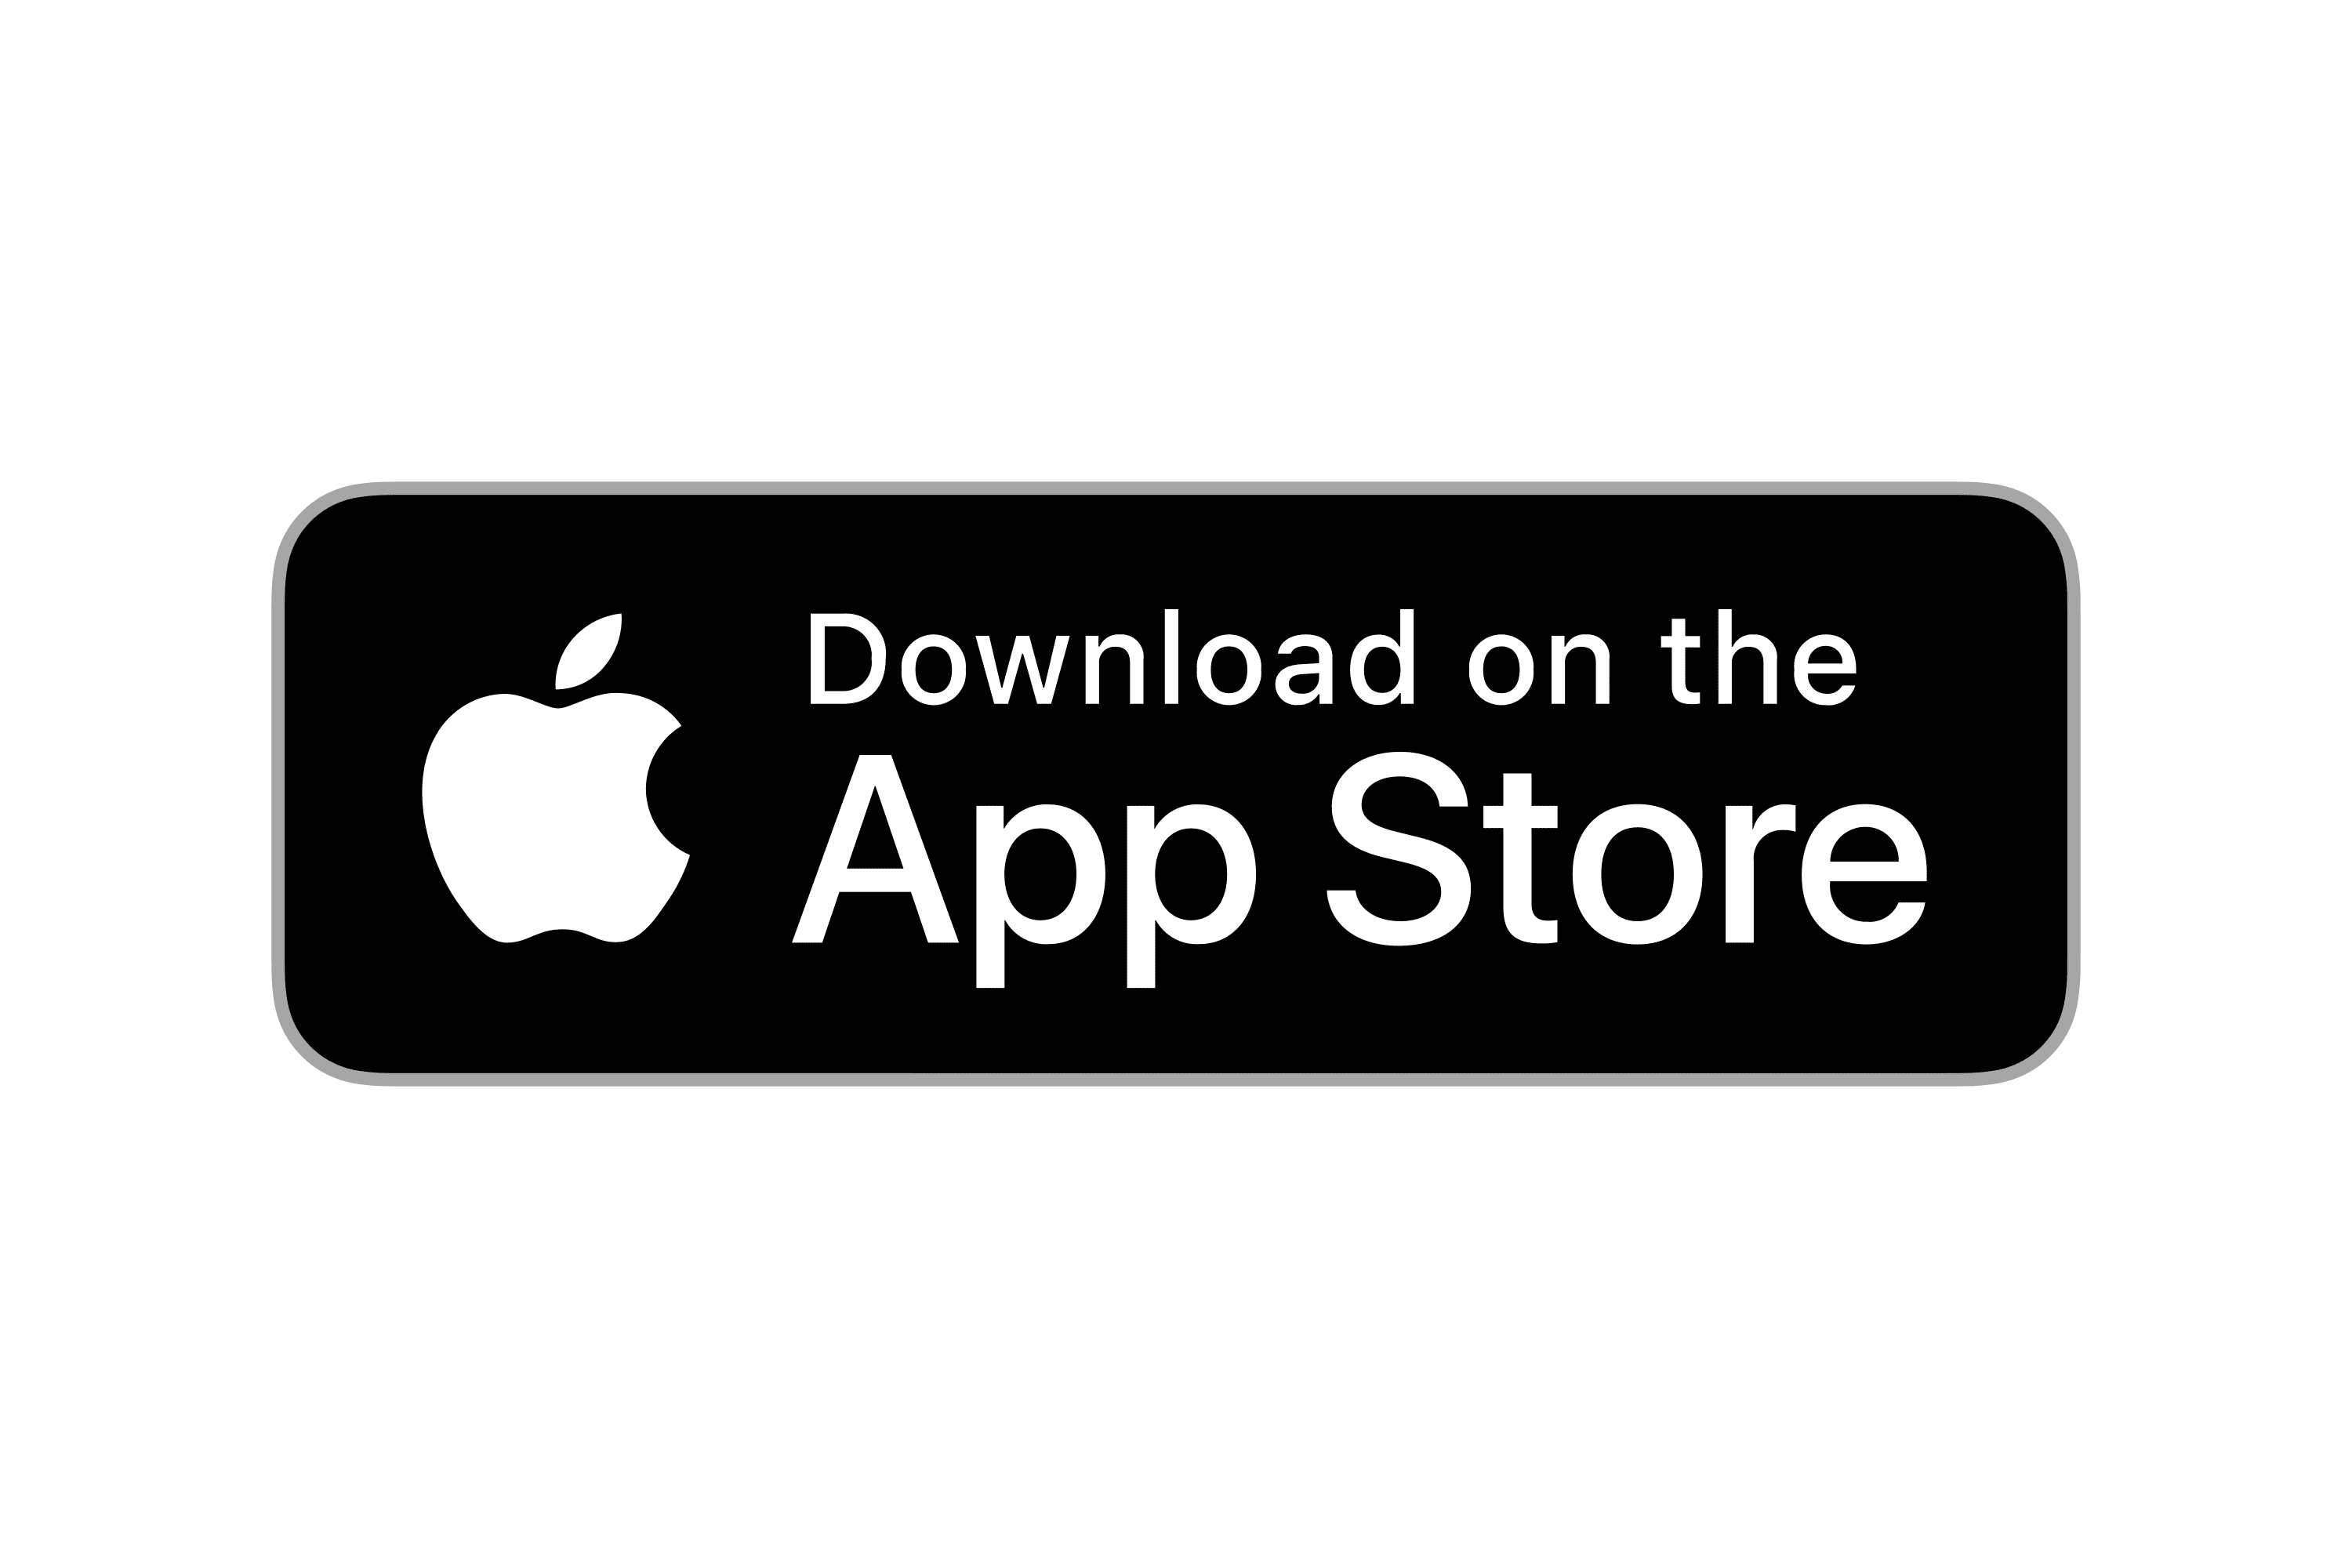 Link to the App Store